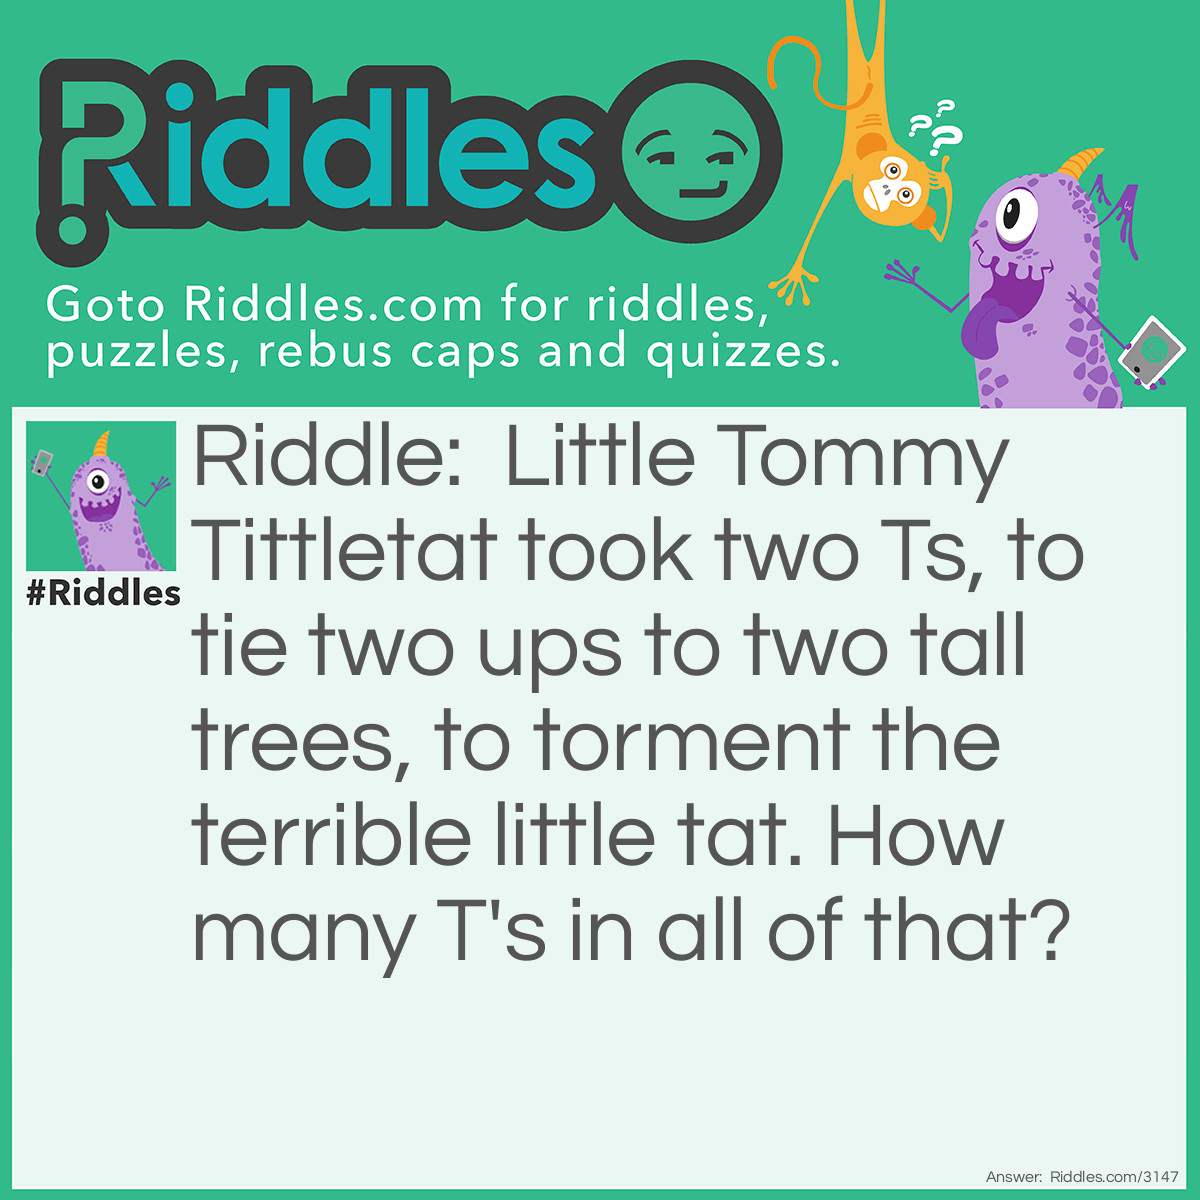 Riddle: Little Tommy Tittletat took two Ts, to tie two ups to two tall trees, to torment the terrible little tat. How many T's in all of that? Answer: There are 2 T's in all of ThaT.